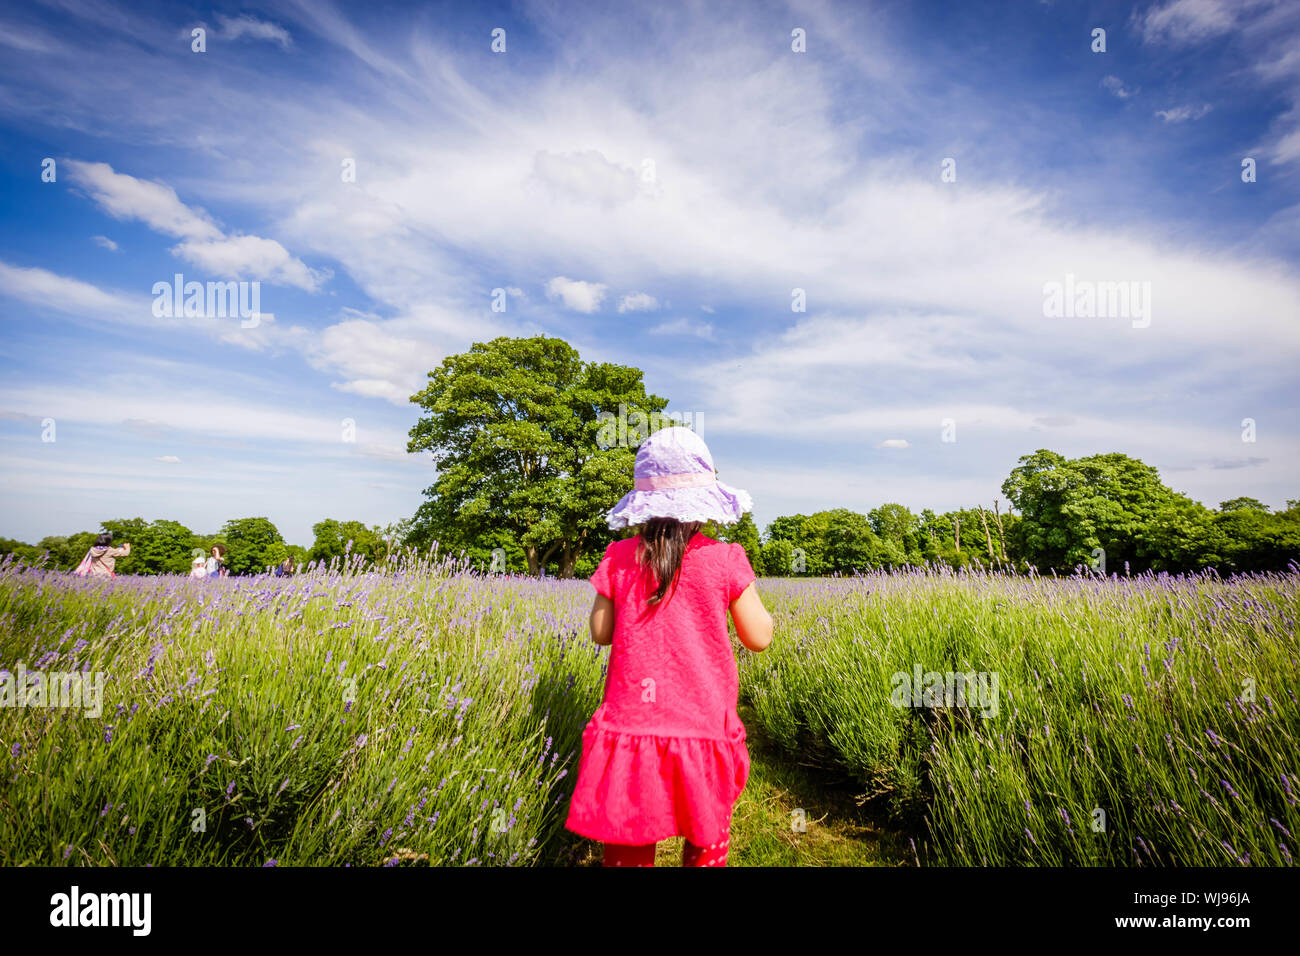 Rear View Of Girl Walking On Field Amidst Grass Stock Photo